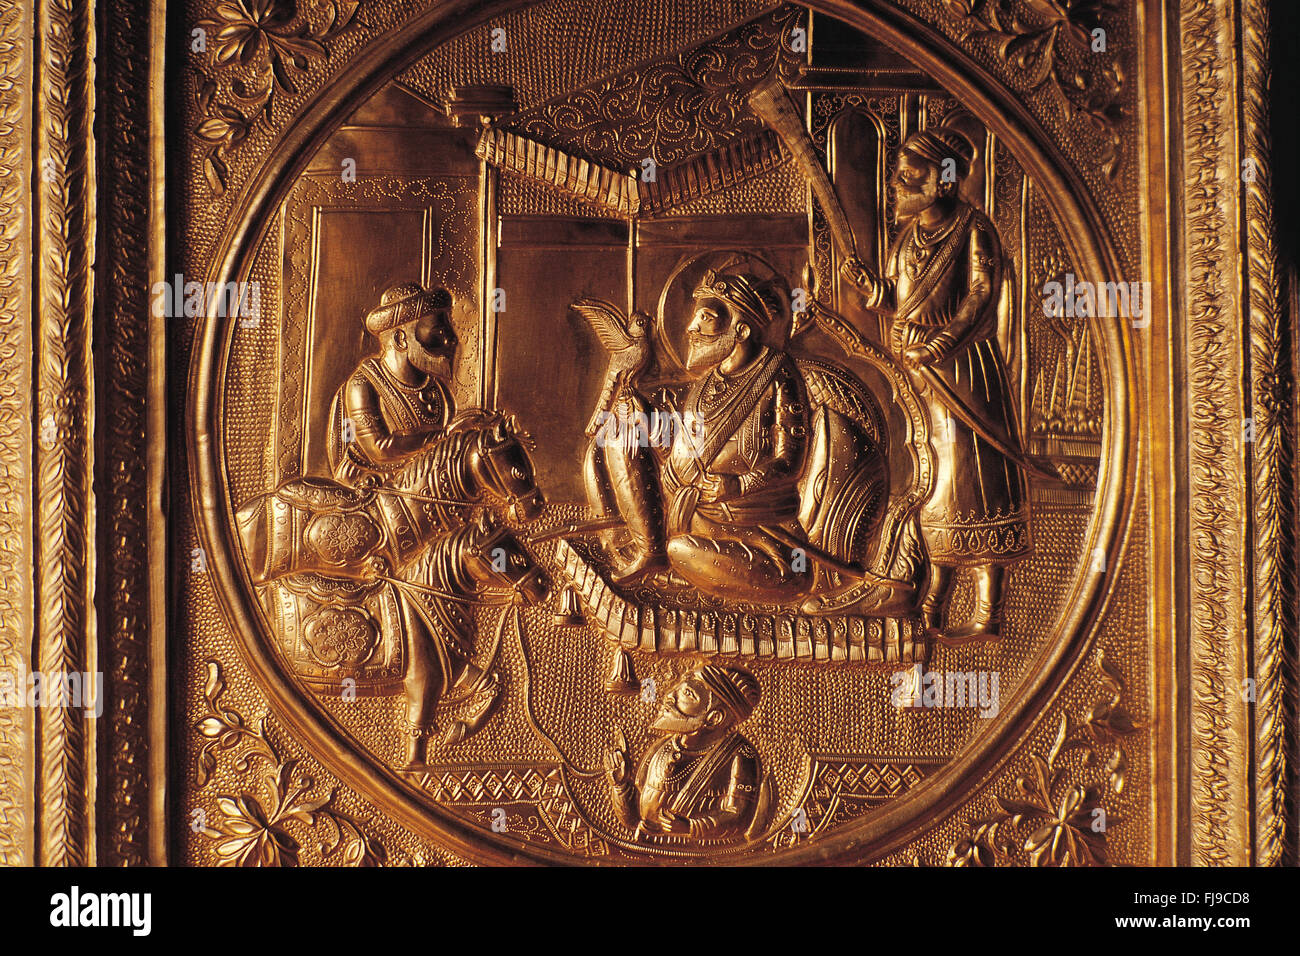 Gold plate embossed in Golden Temple, Amritsar, Punjab, India, Asia Stock Photo